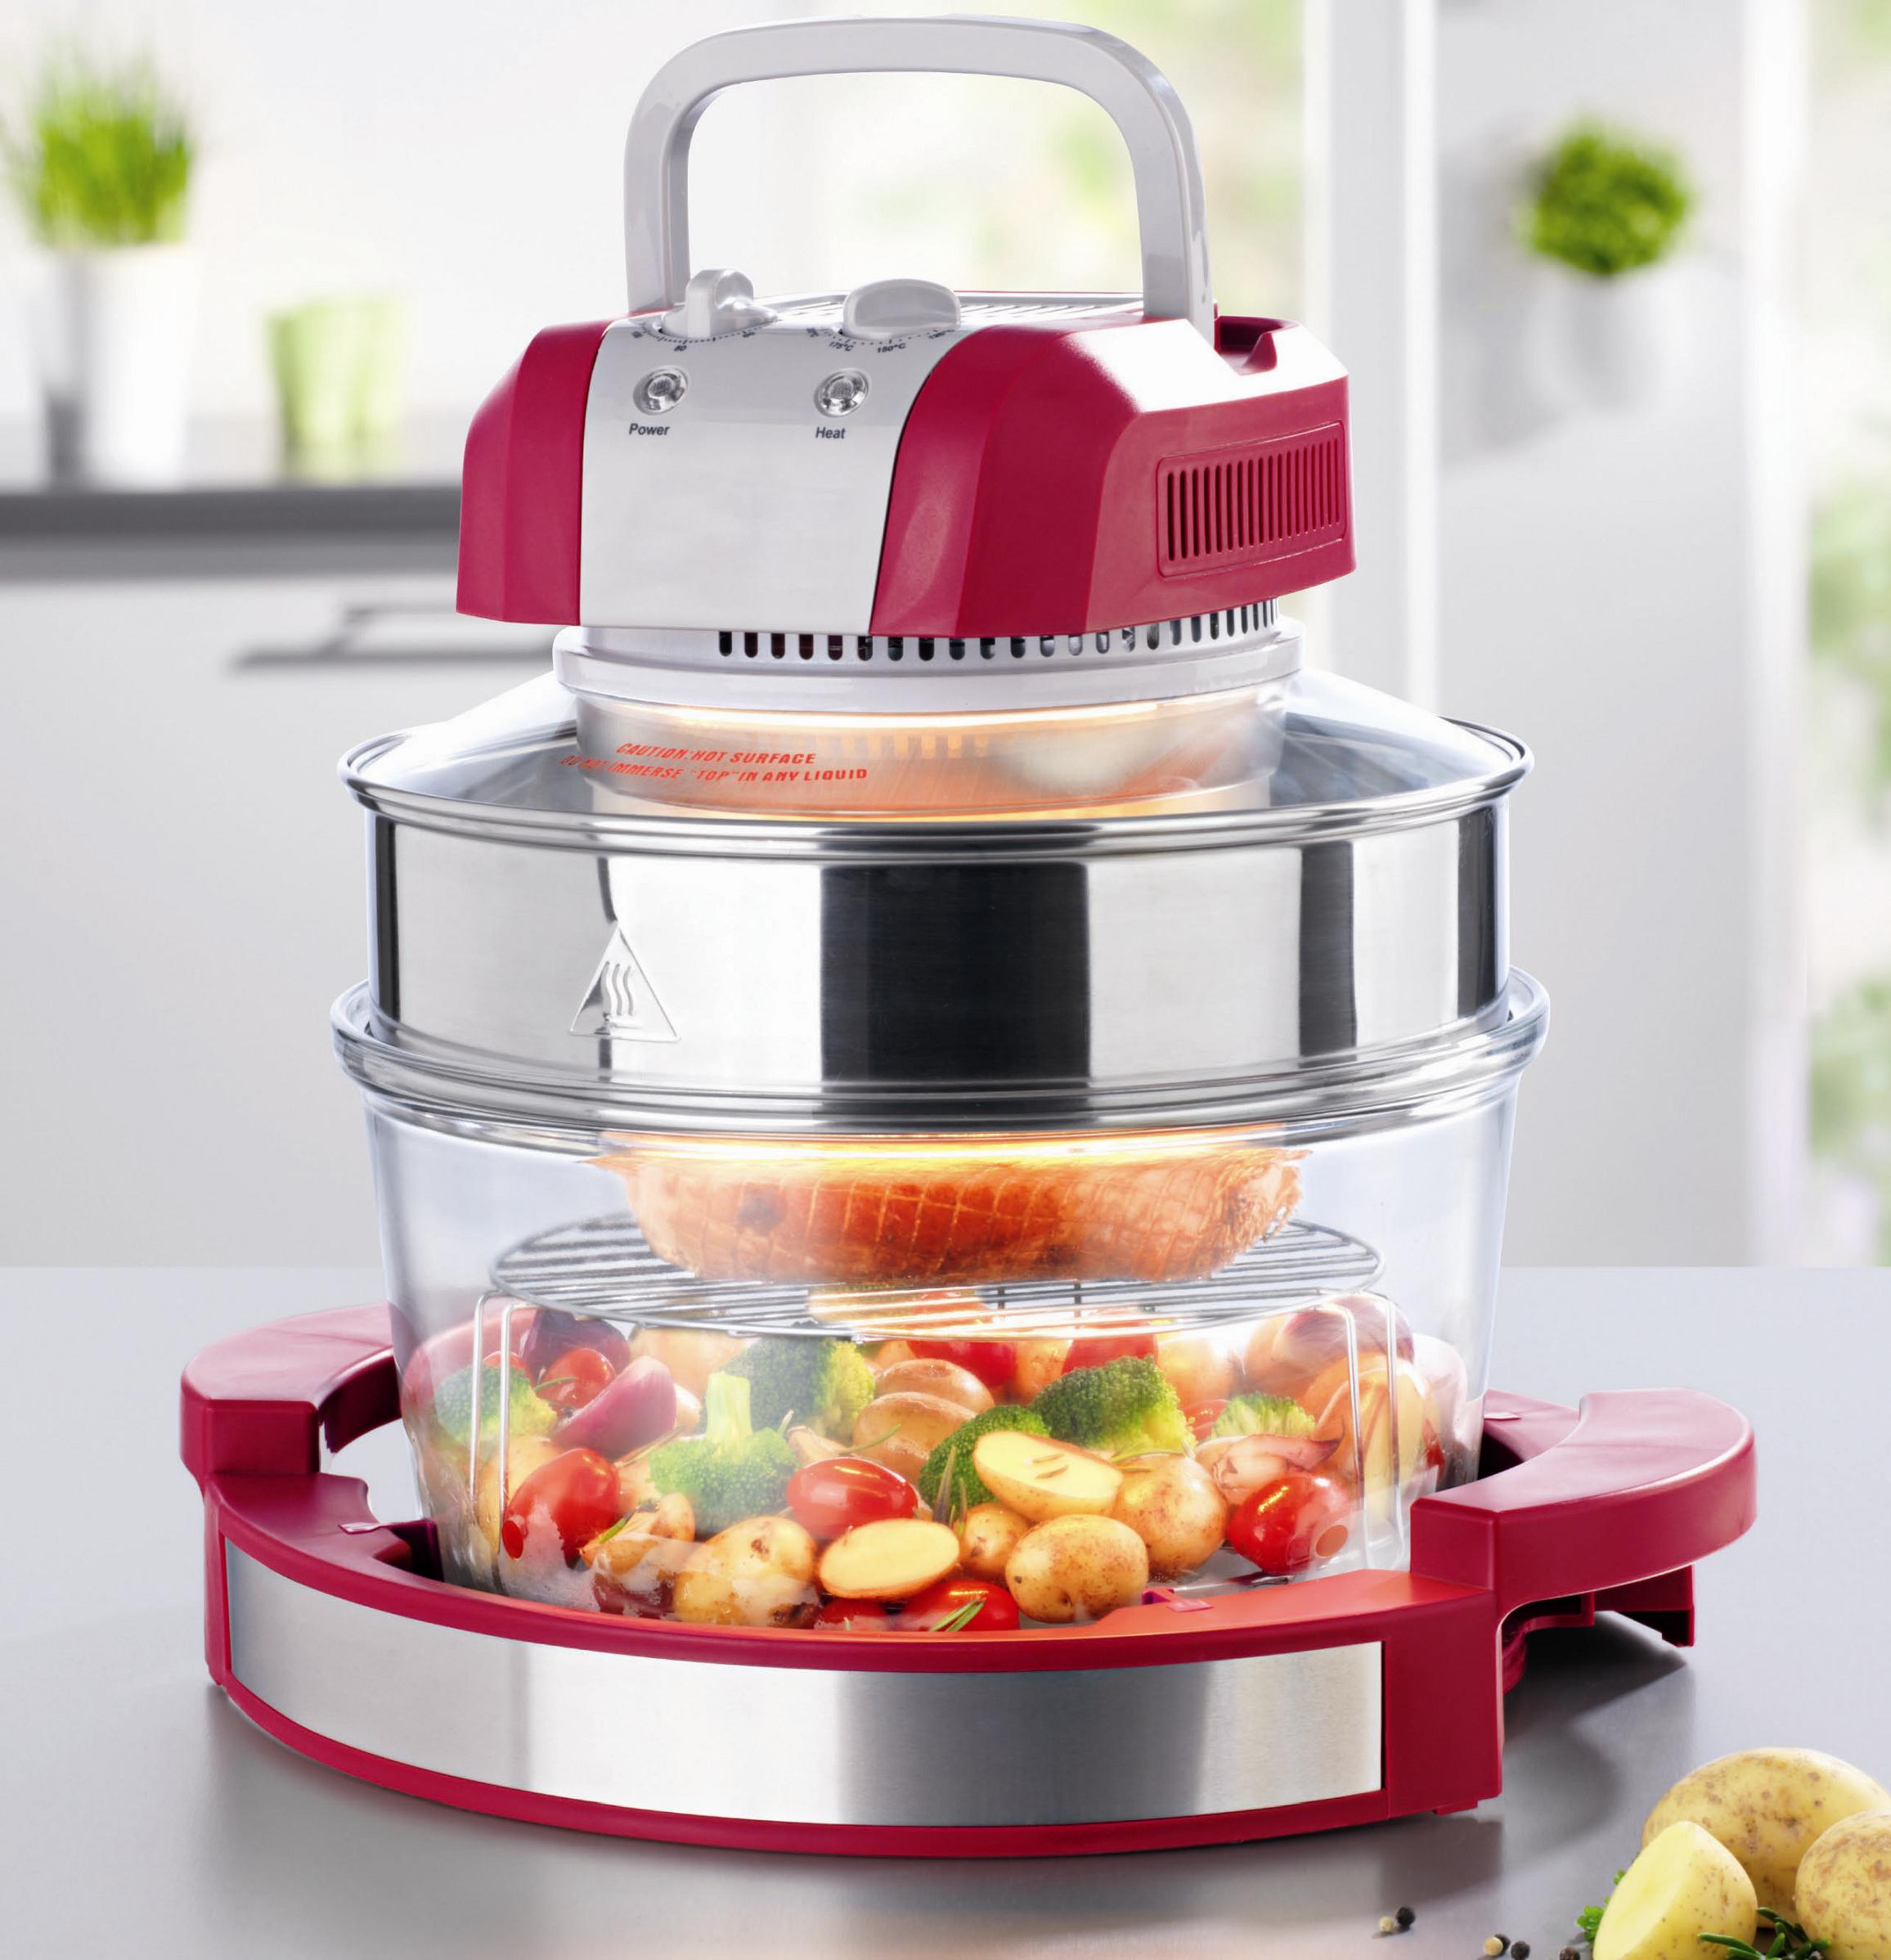 1300W 17L Multifuntional Halogen Oven As Seen On TV with CE/LVD/EMC/CB/ROHS/LFGB certified